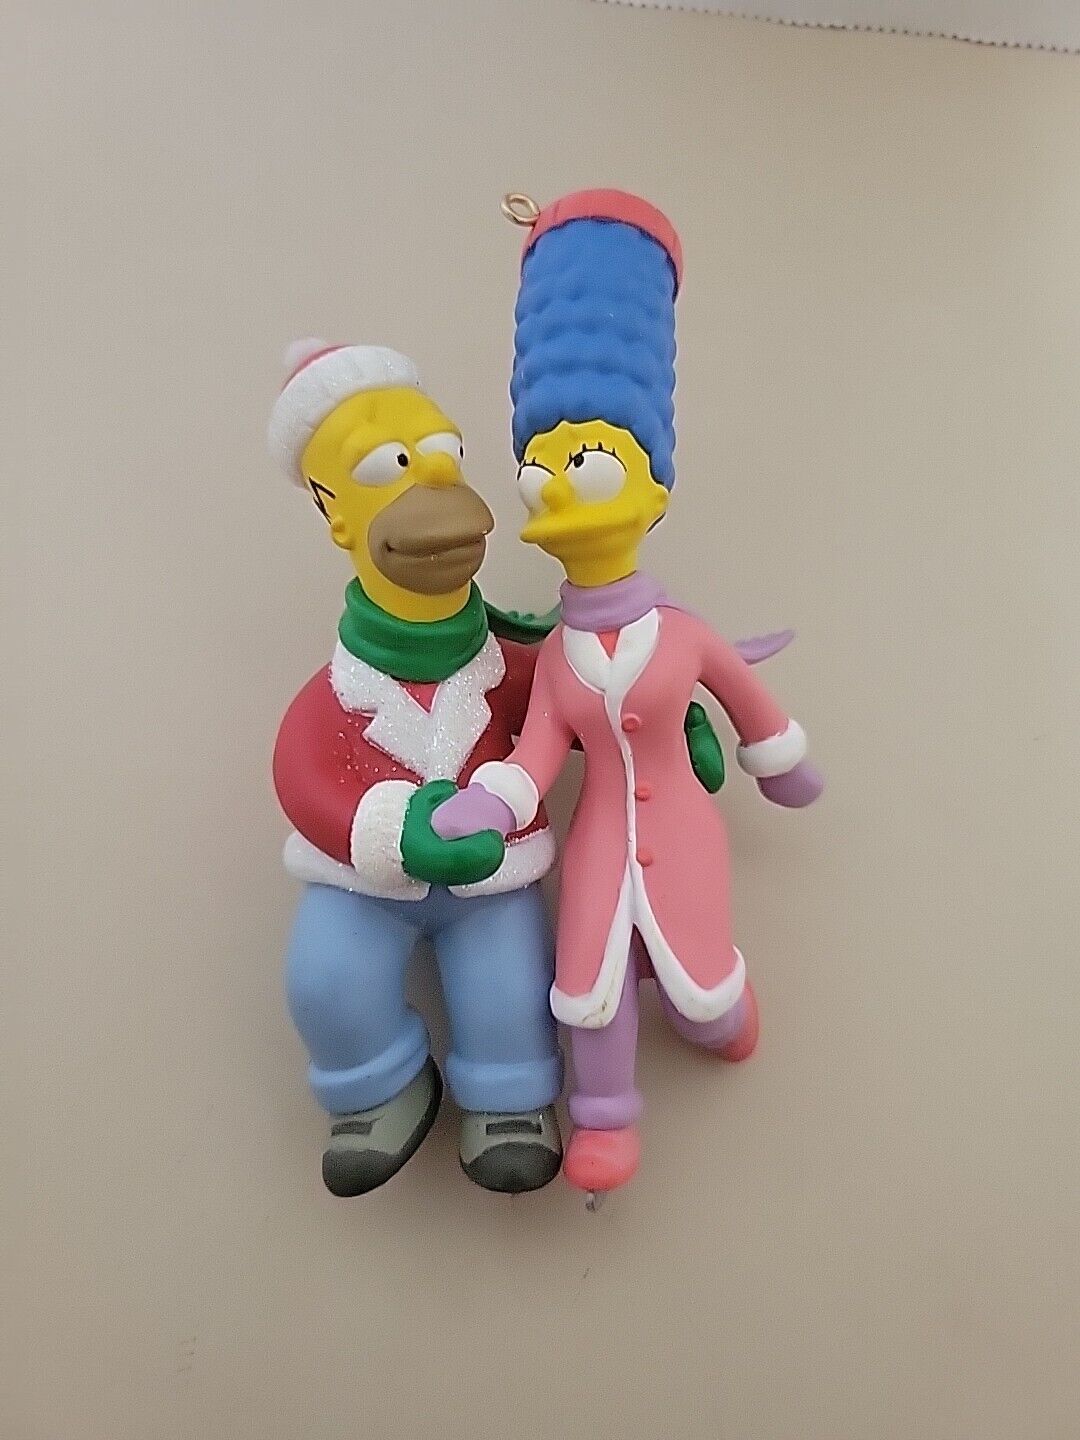 2006 Carlton Heirloom Ornament The Simpsons Smooth as Ice Homer and Marge